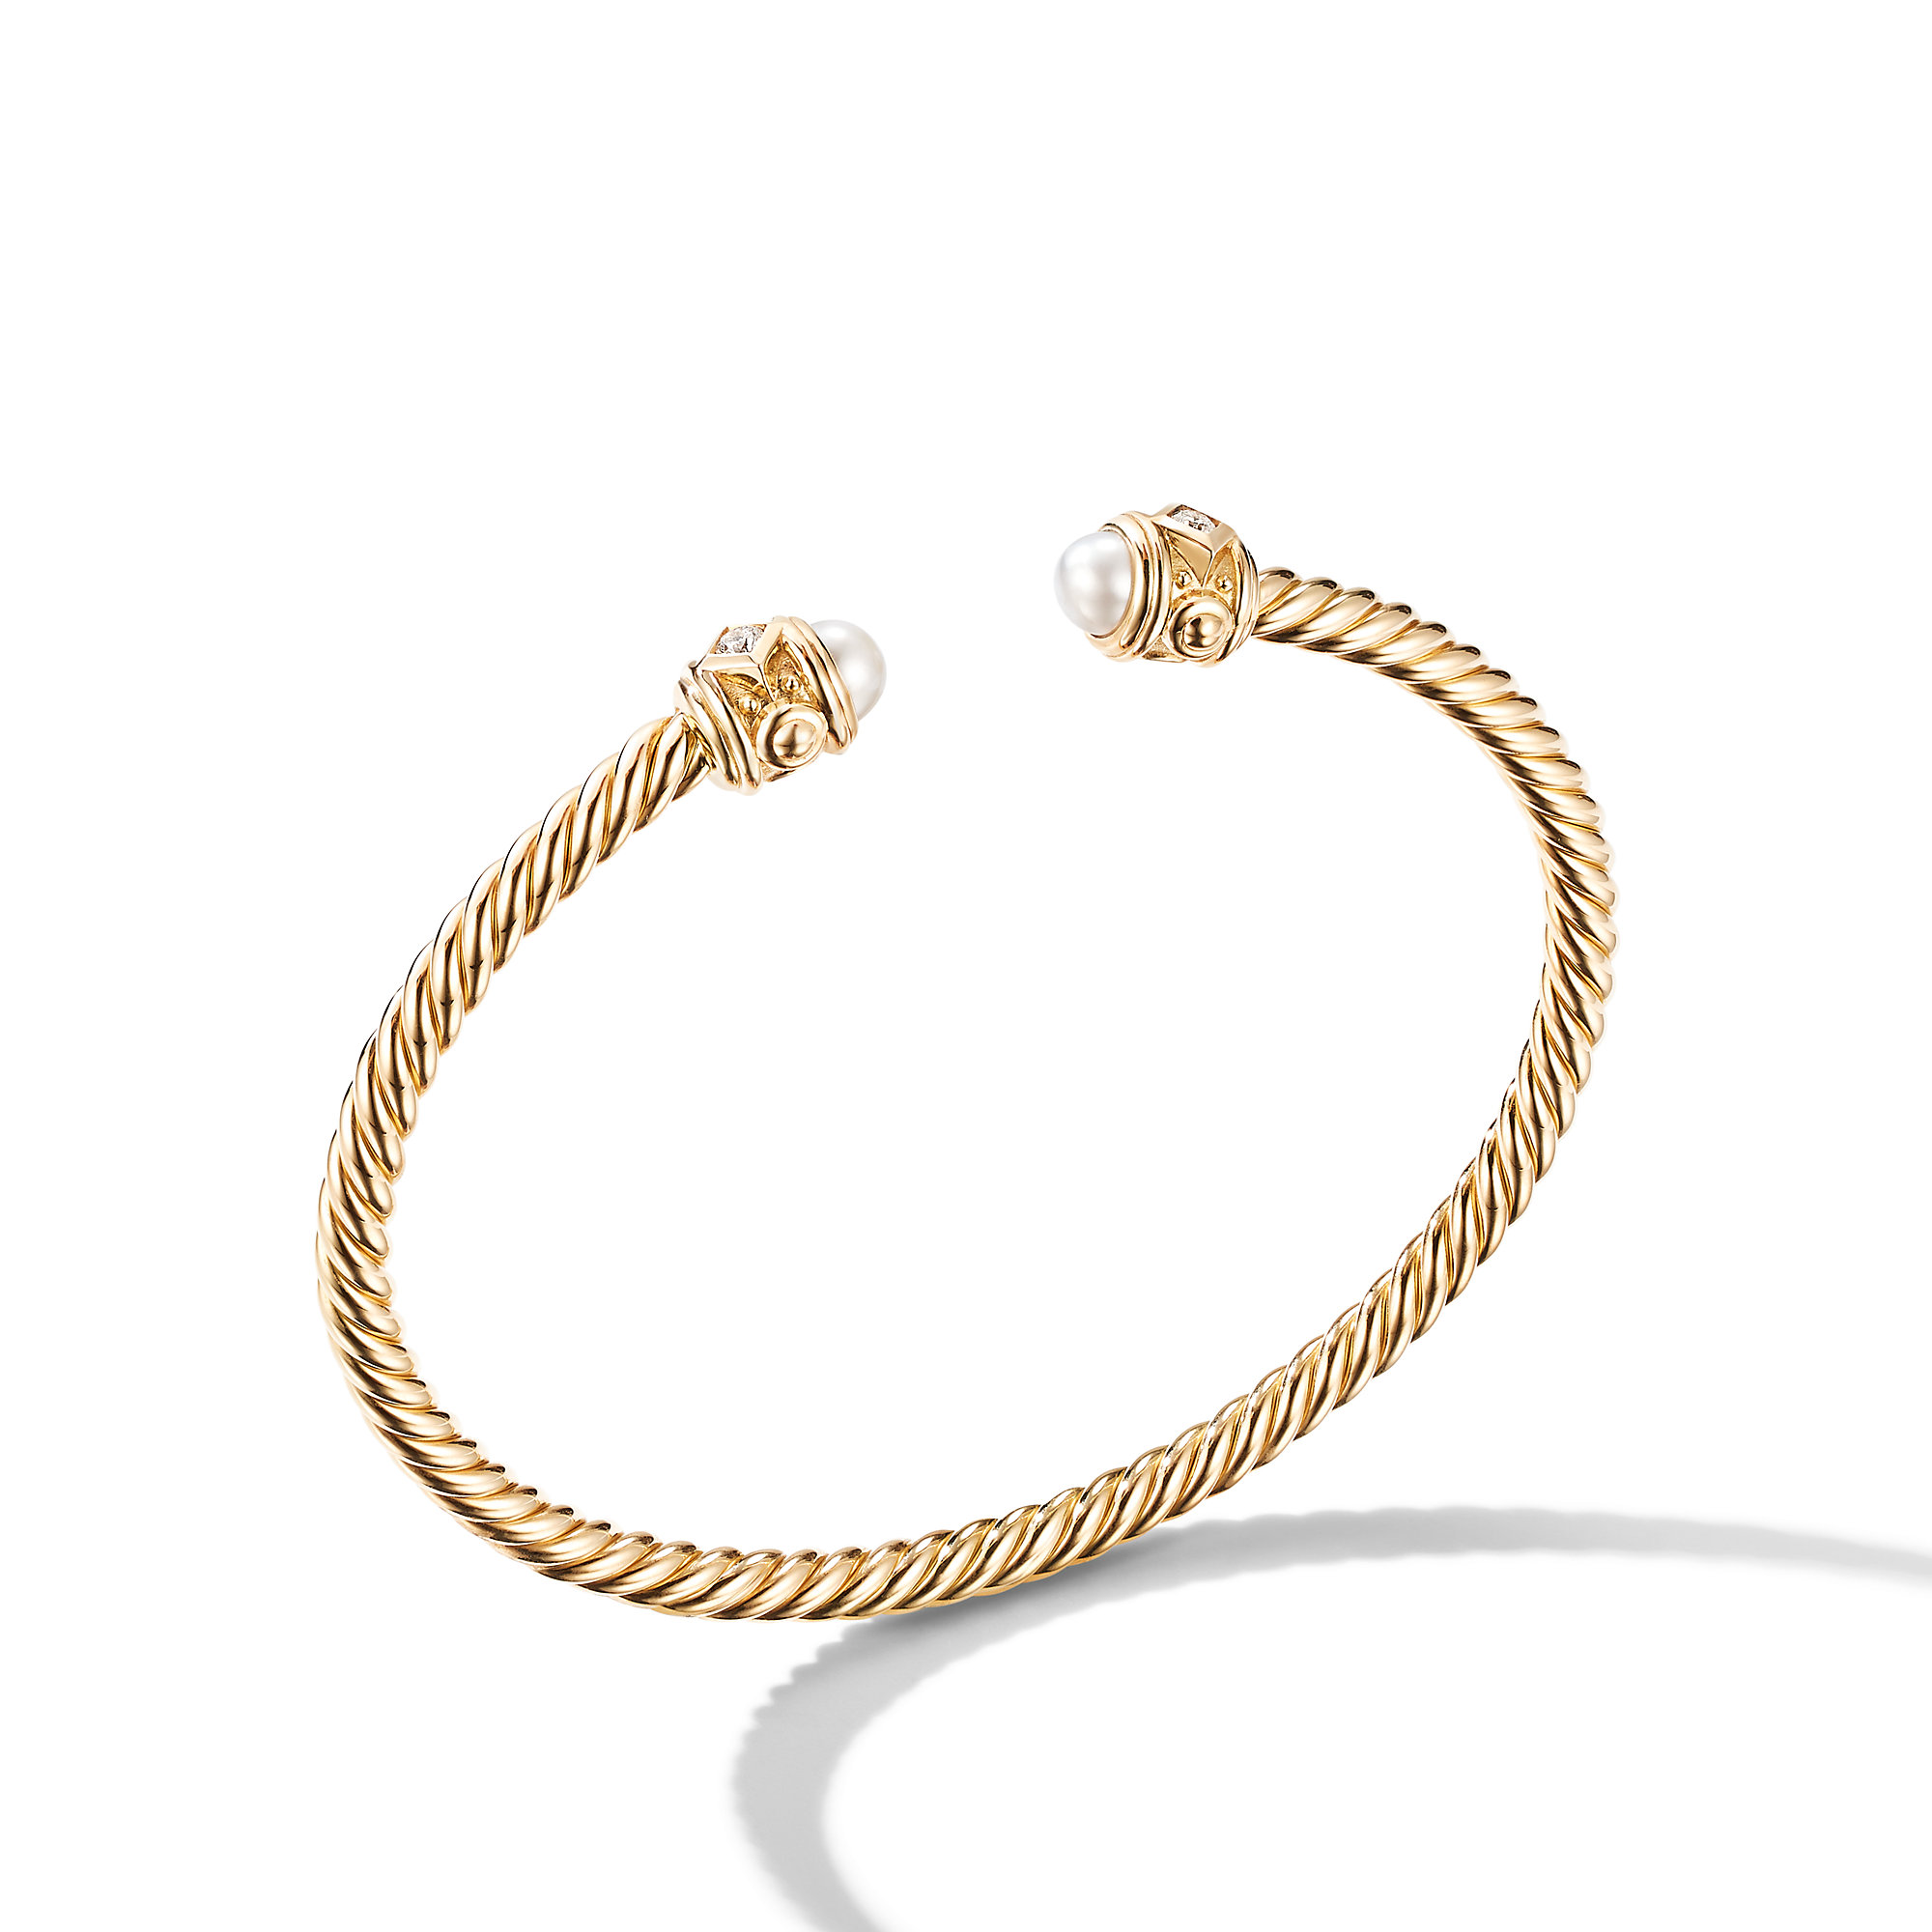 Renaissance Bracelet in 18K Yellow Gold with Pearls and Diamonds